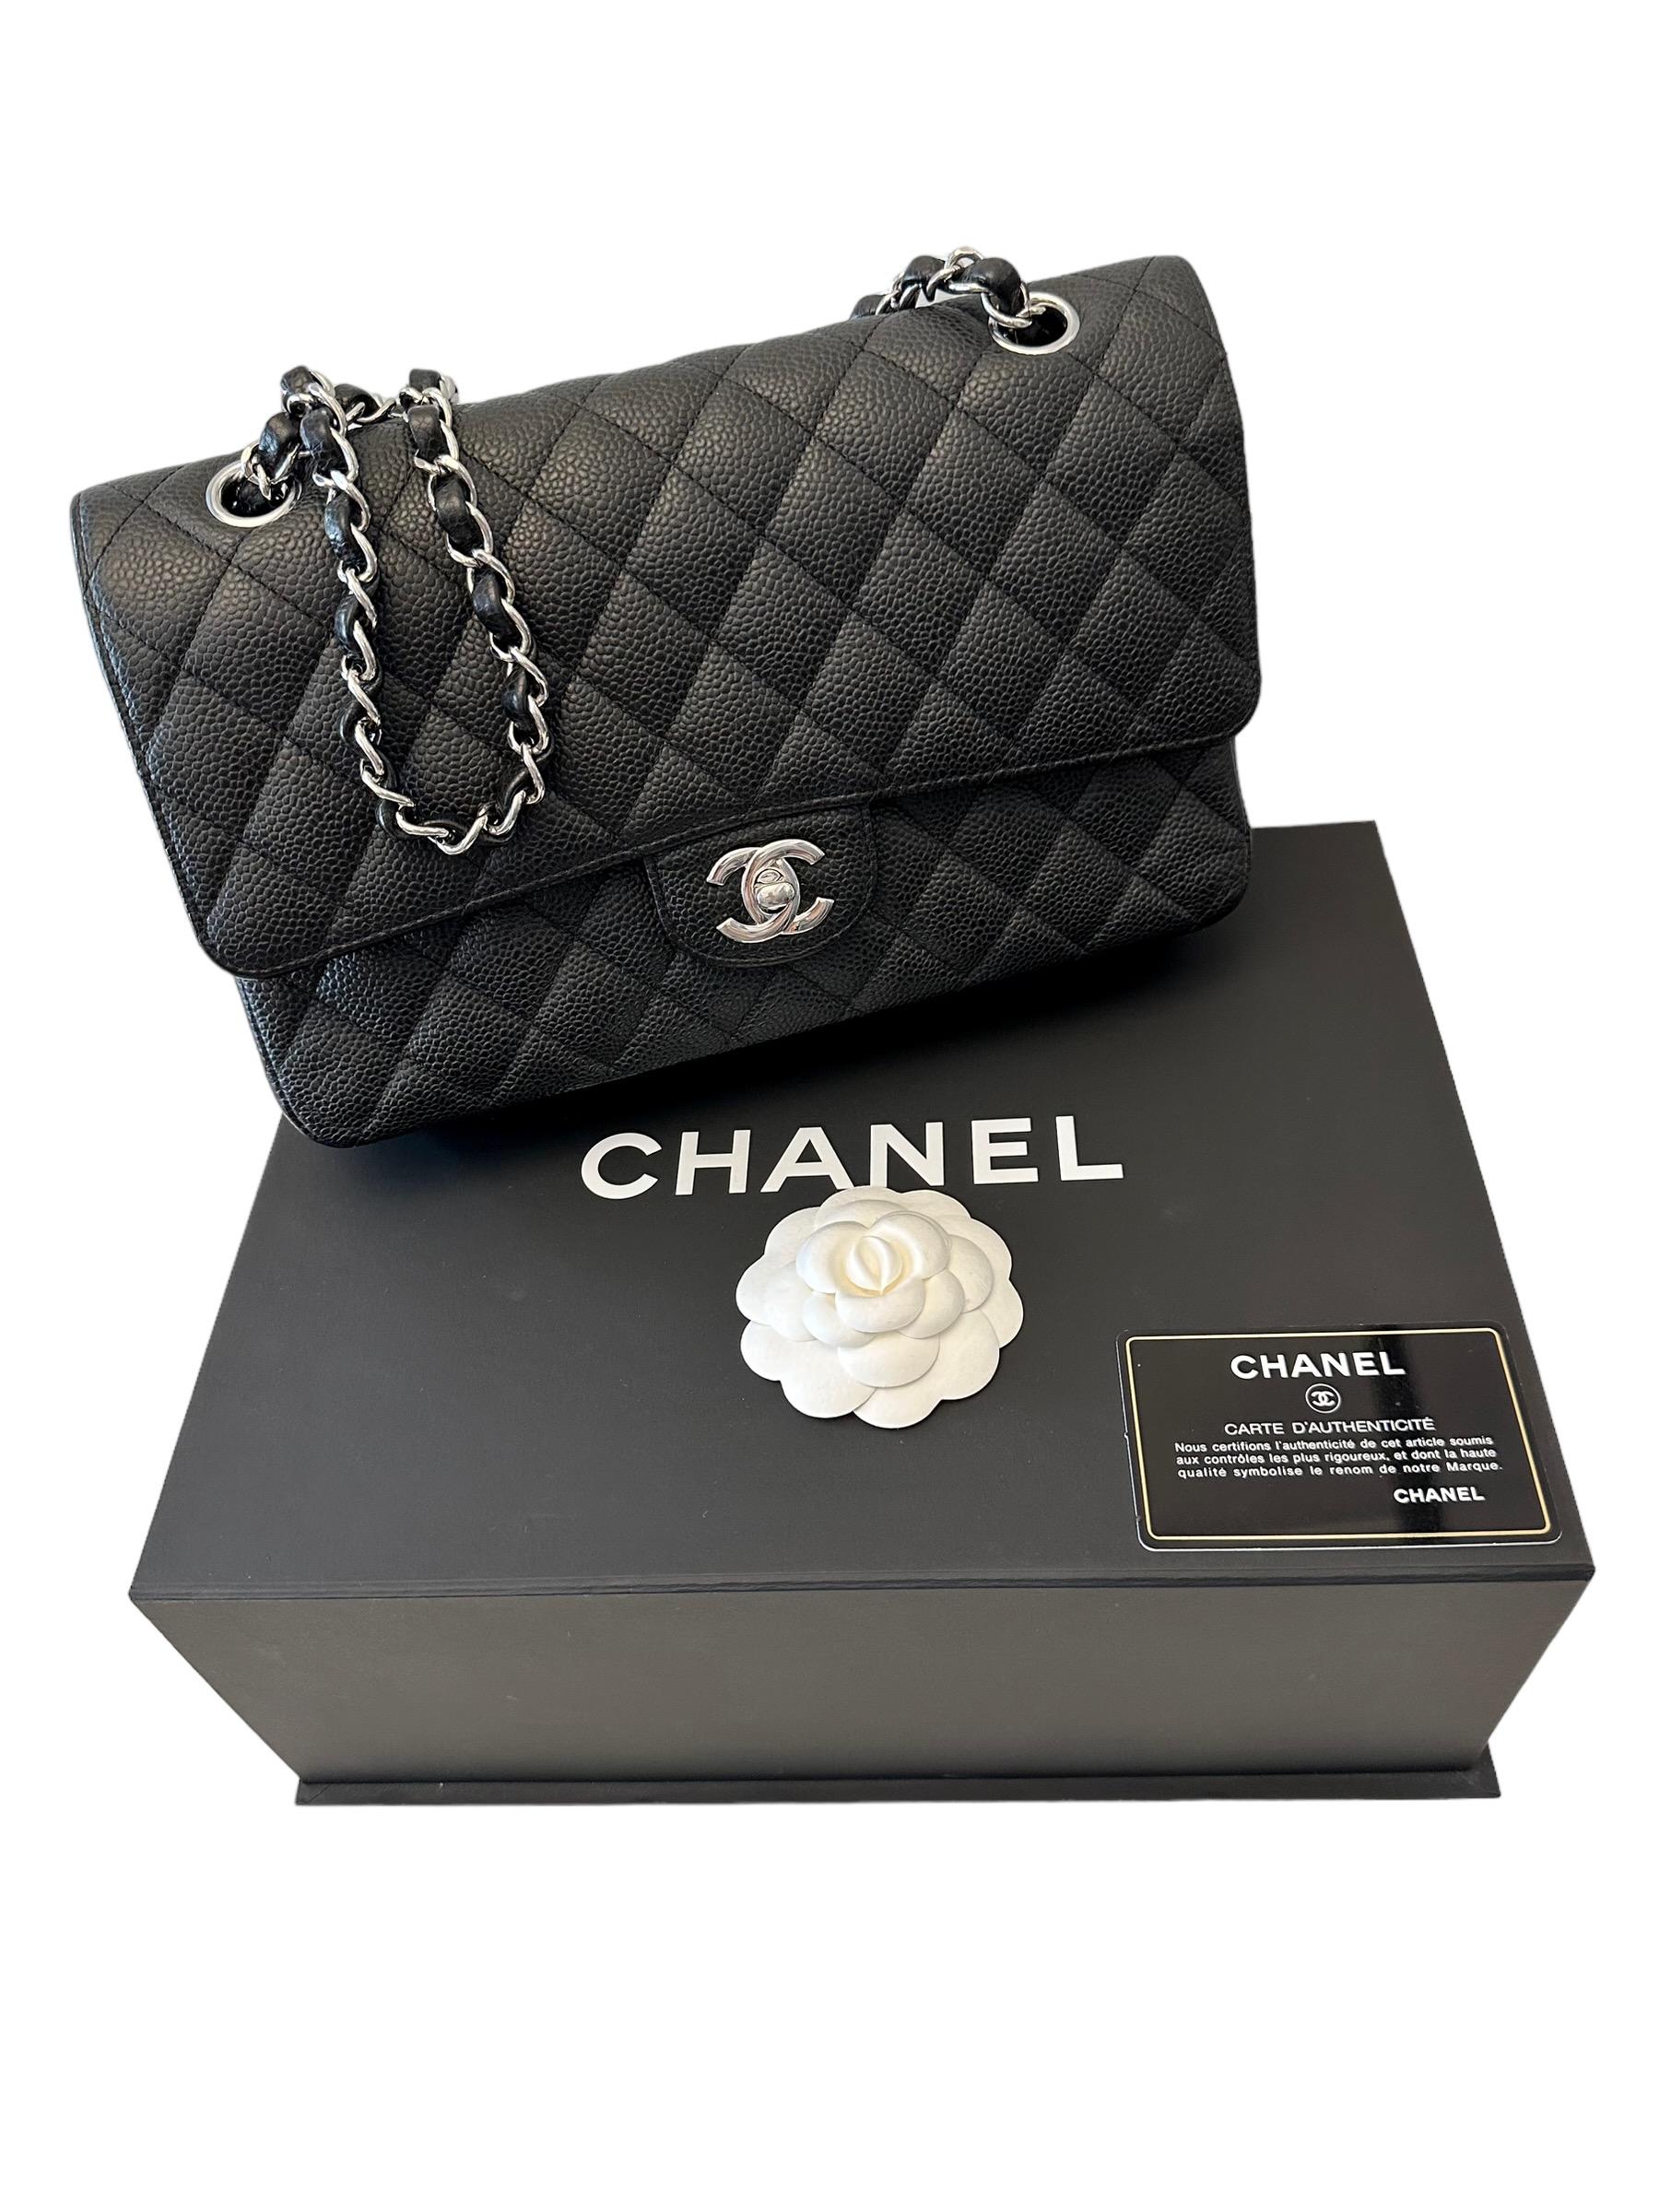 The Chanel Timeless is the ultimate companion for any occasion. 
Our pre-owned Timeless in medium size is in excellent condition. As it is made in France, its quality and finish are perfect.
It is crafted from black caviar leather and is topped with